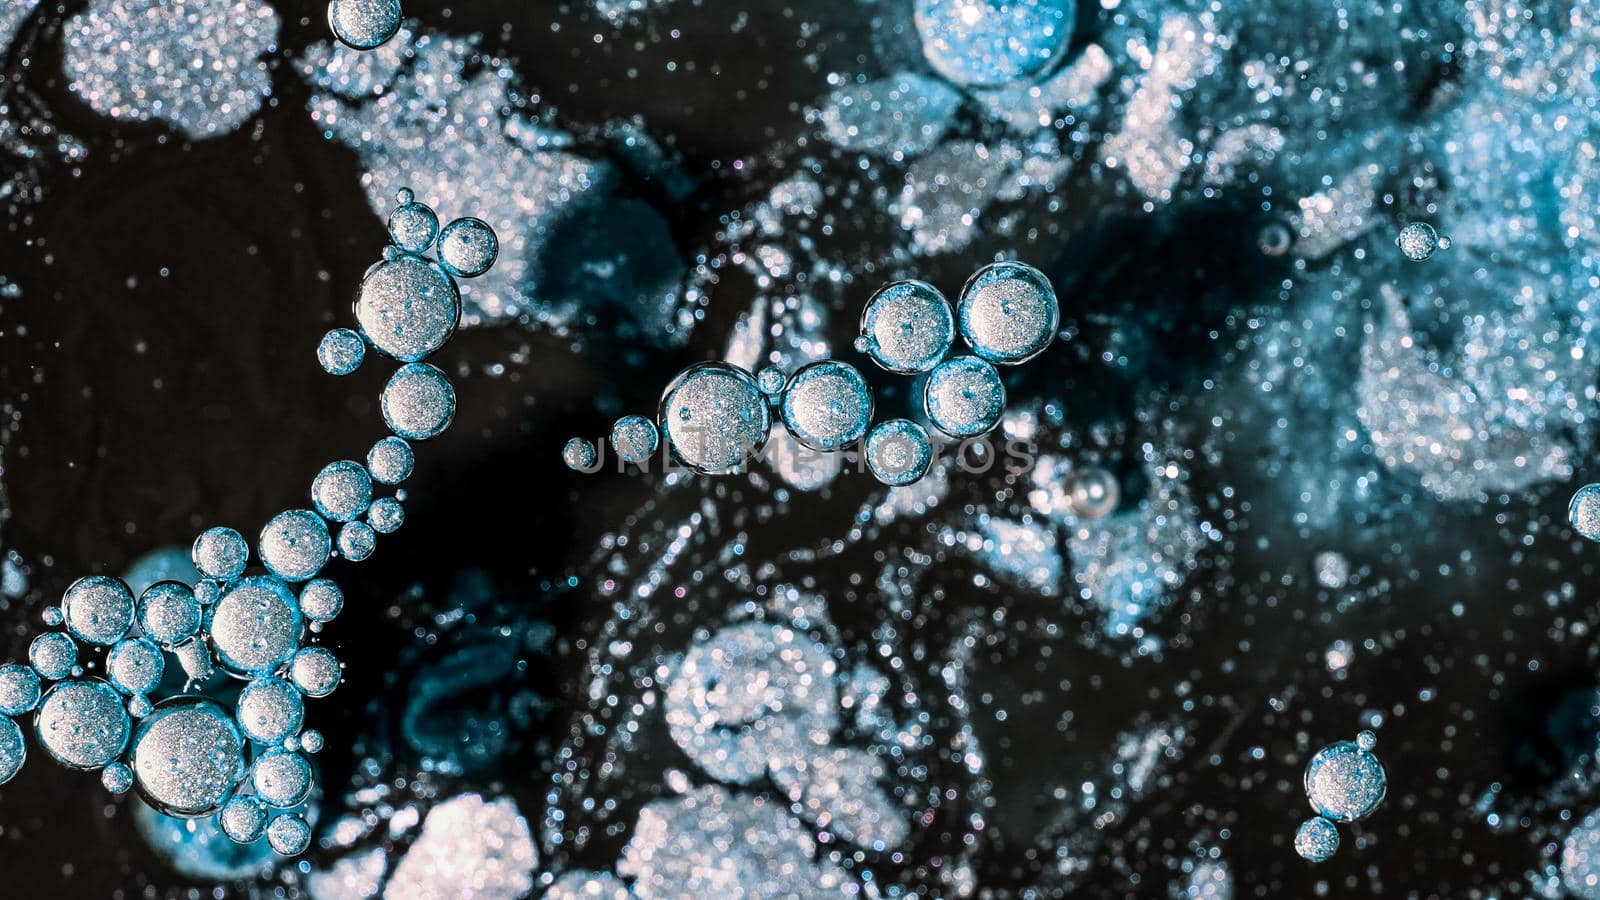 Abstract of frost bubbles bursts and dissolves in black paint. Blue sphere shapes. Detailed background, beautiful design, ice balloons texture. by kristina_kokhanova